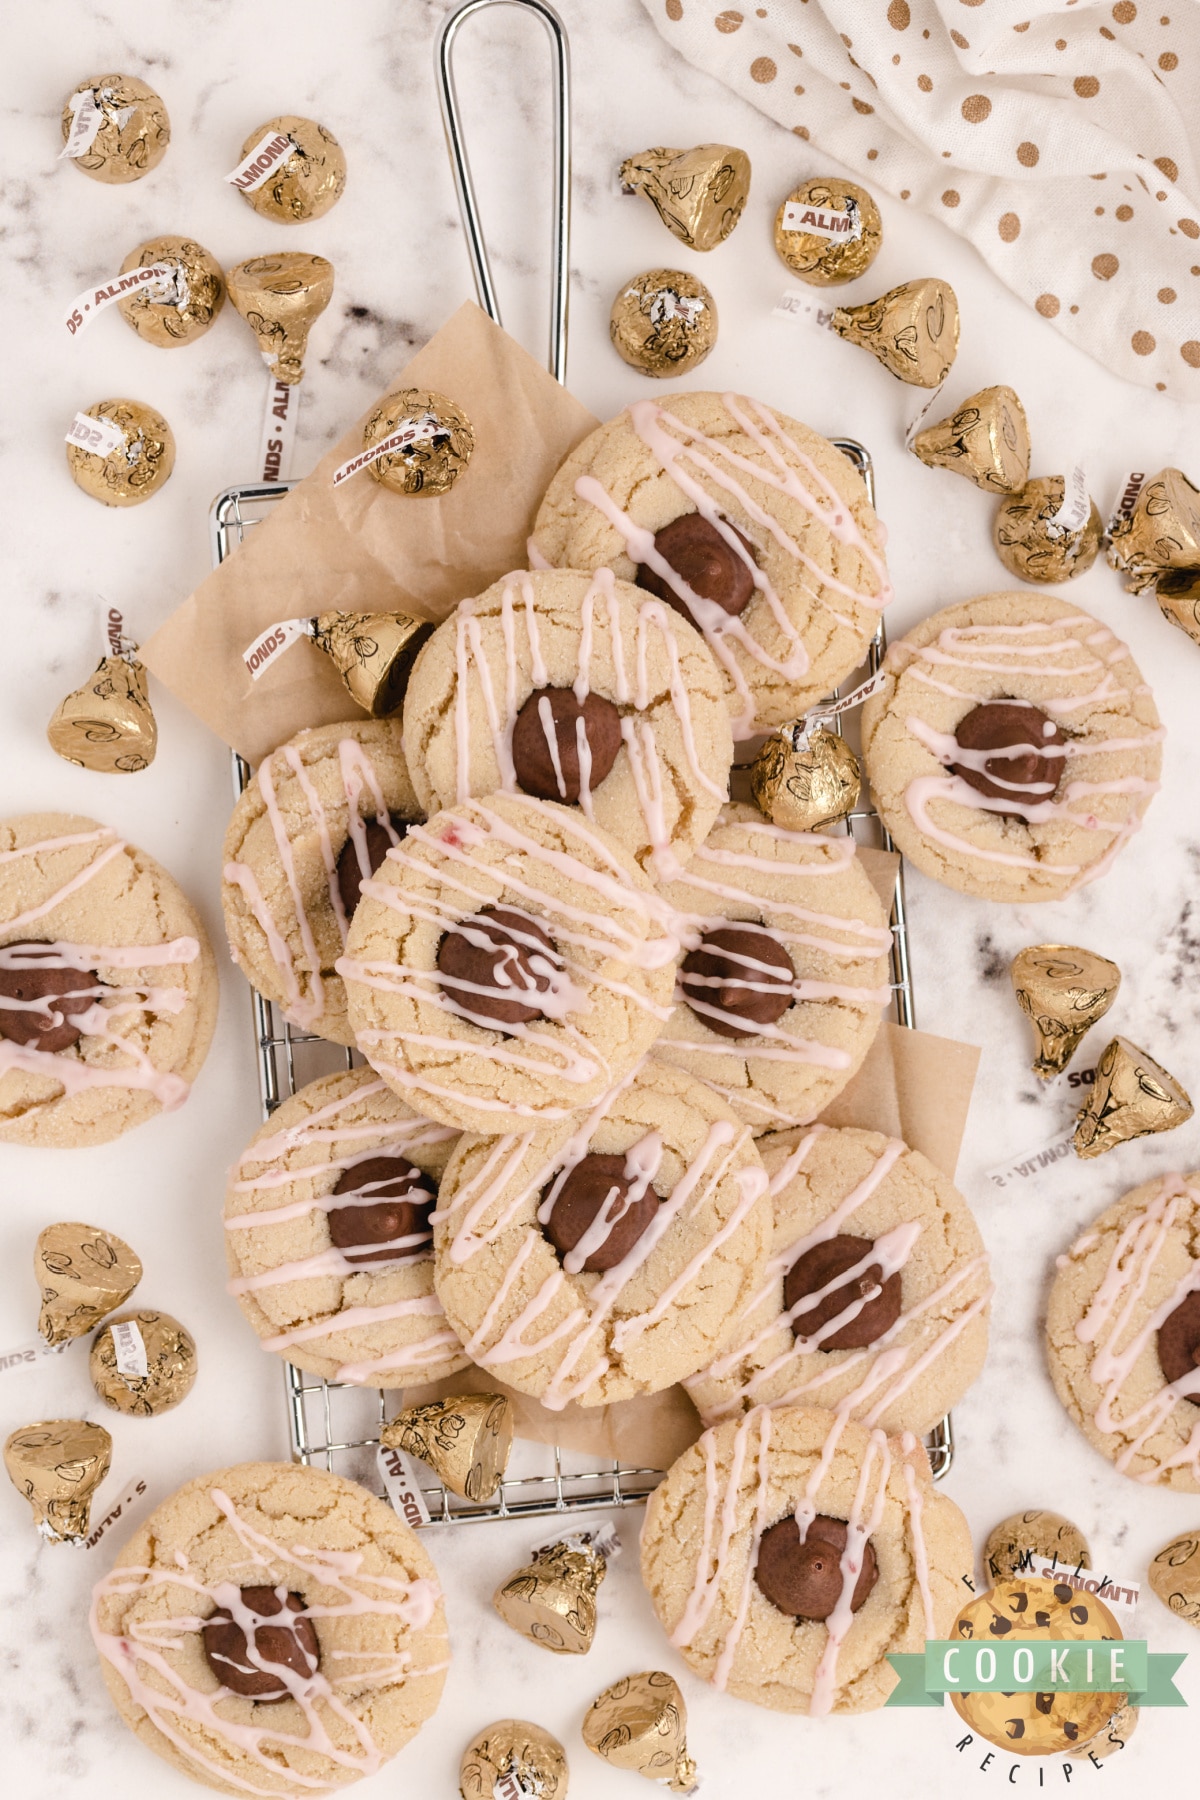 Almond cookies with almond kisses in the middle